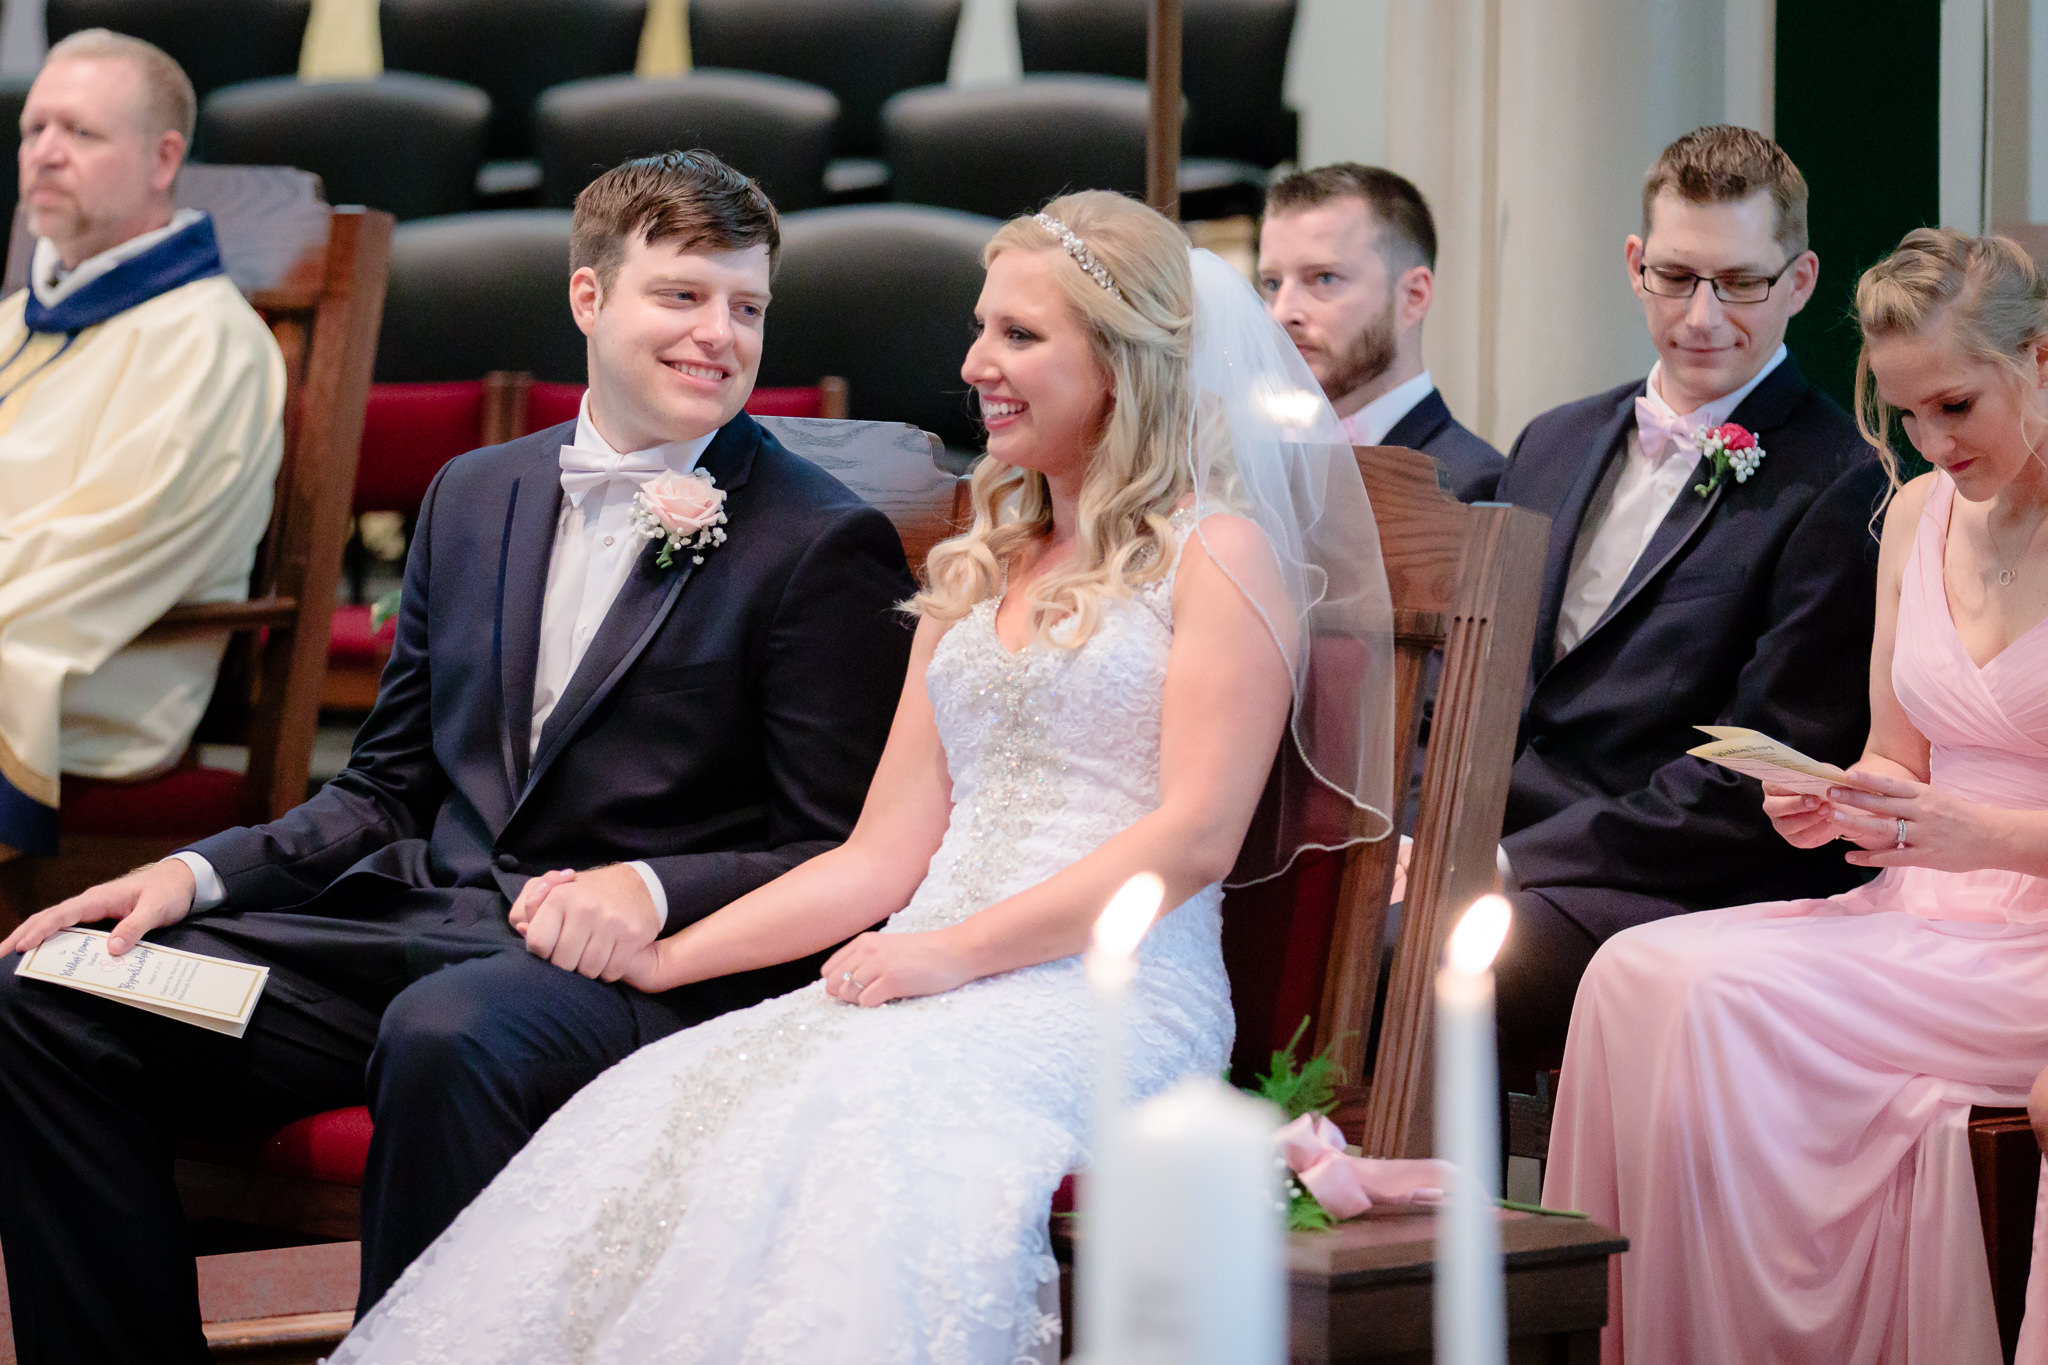 Bride & groom smile at each other during their Chapel of the Holy Spirit wedding at Duquesne University